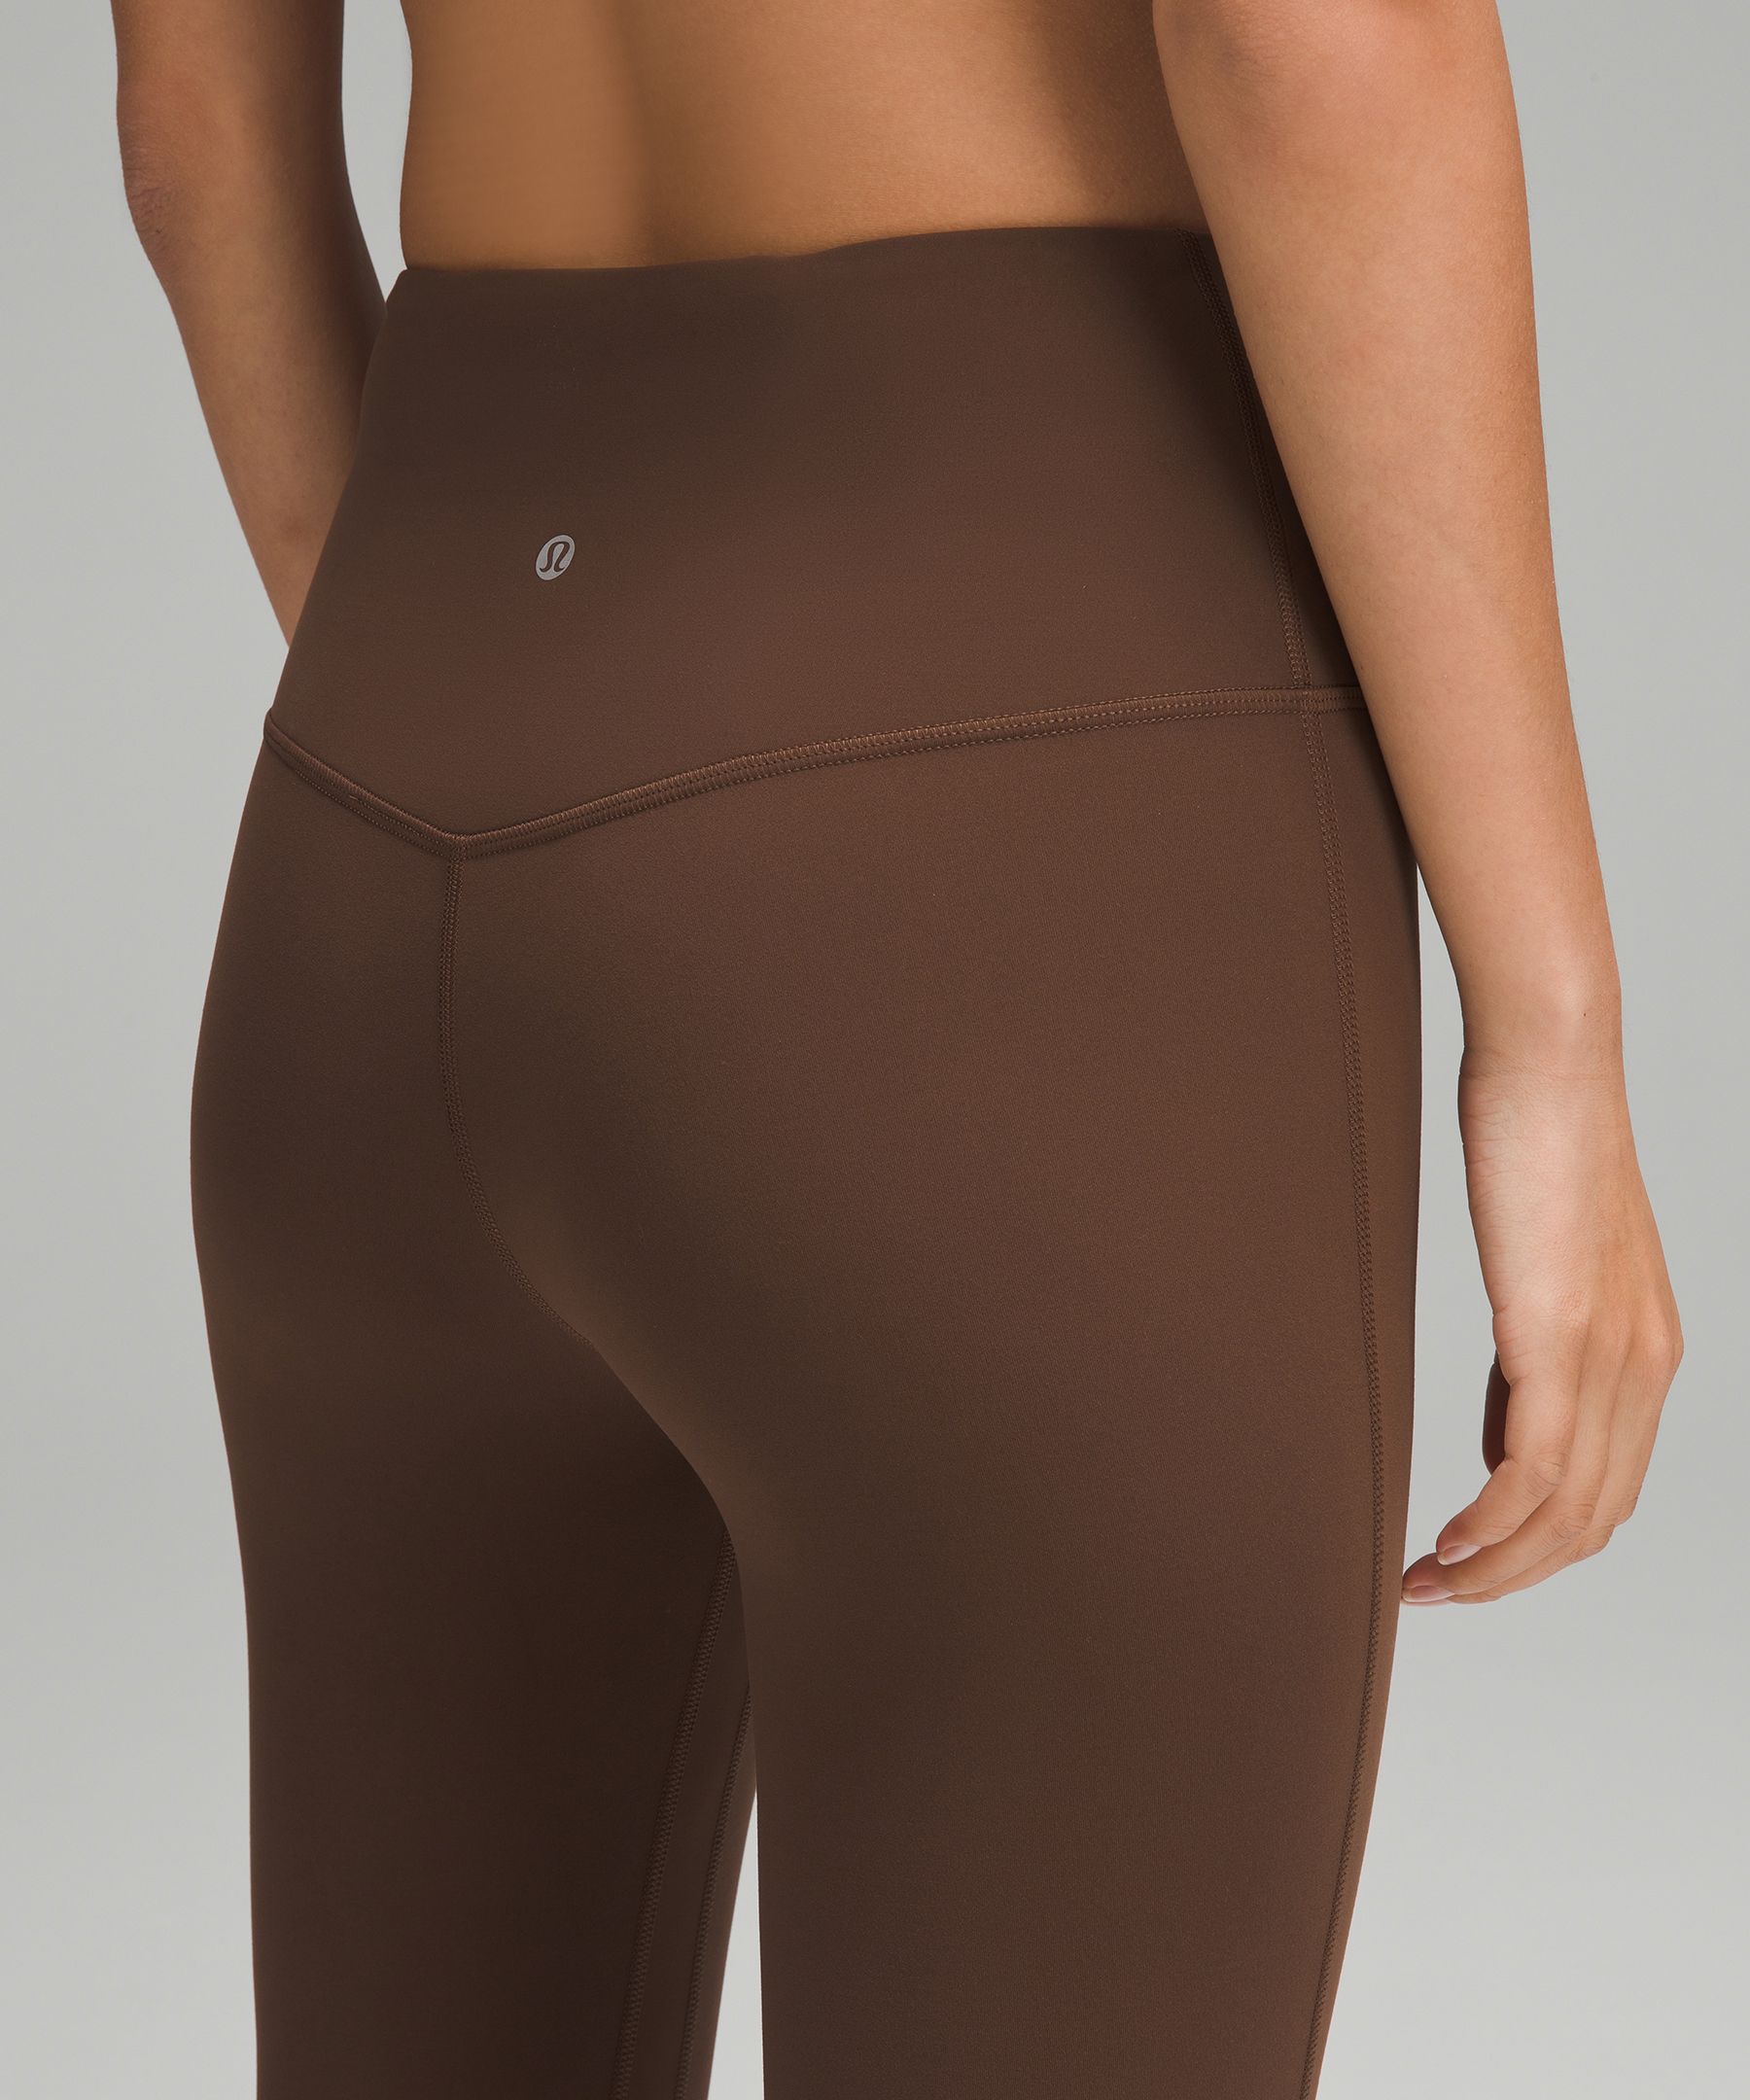 Lululemon Align High-Rise Mini-Flared Pant Regular Green Size 2 - $60 (49%  Off Retail) New With Tags - From kaleigh